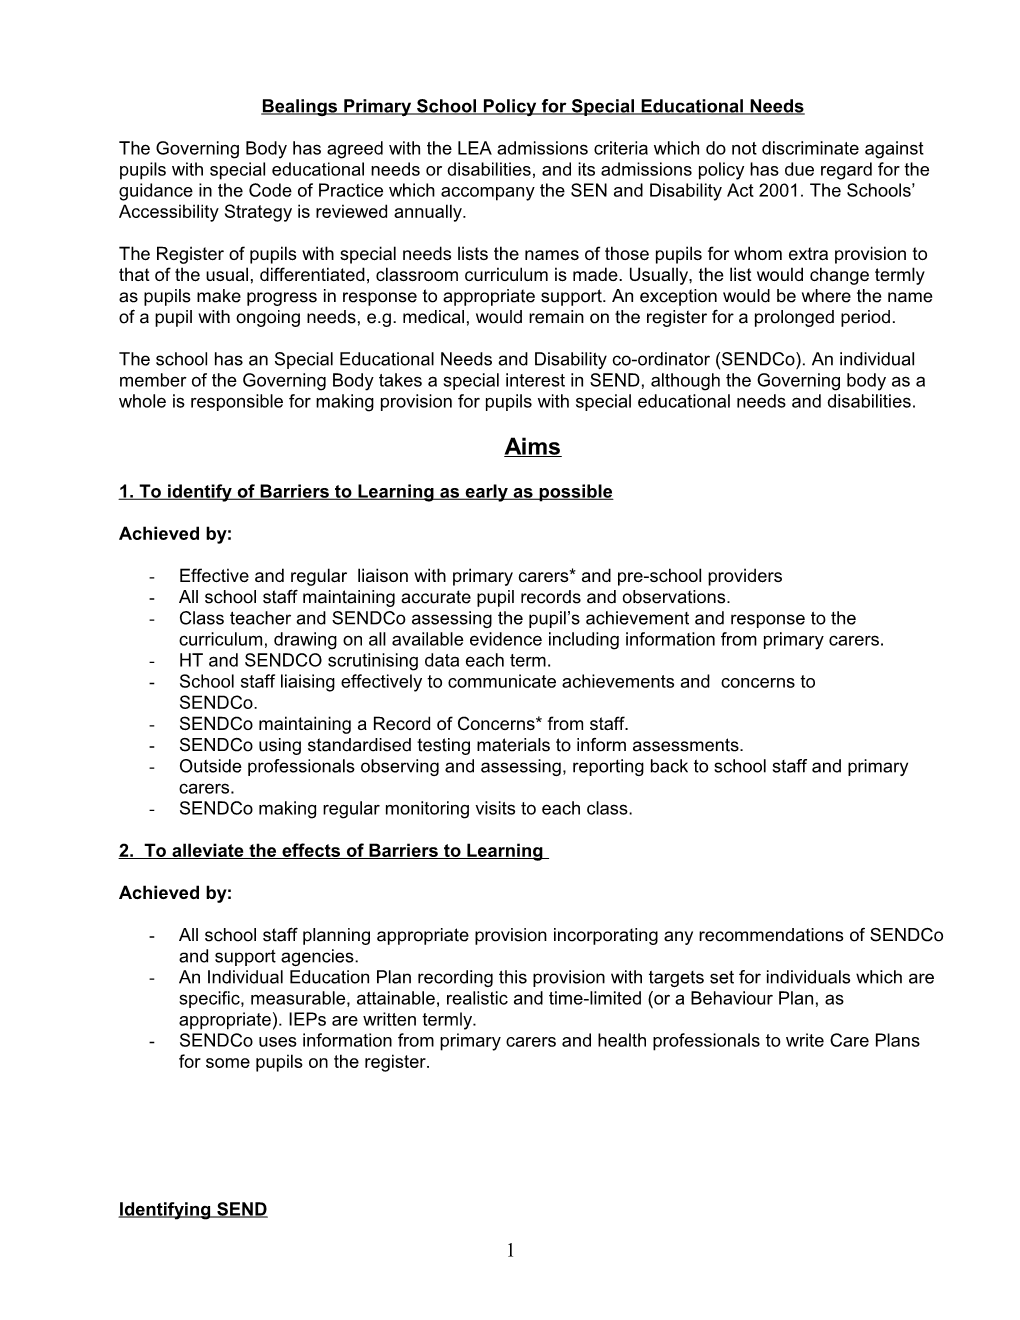 Cedarwood Primary School Policy for Inclusion- May 2007